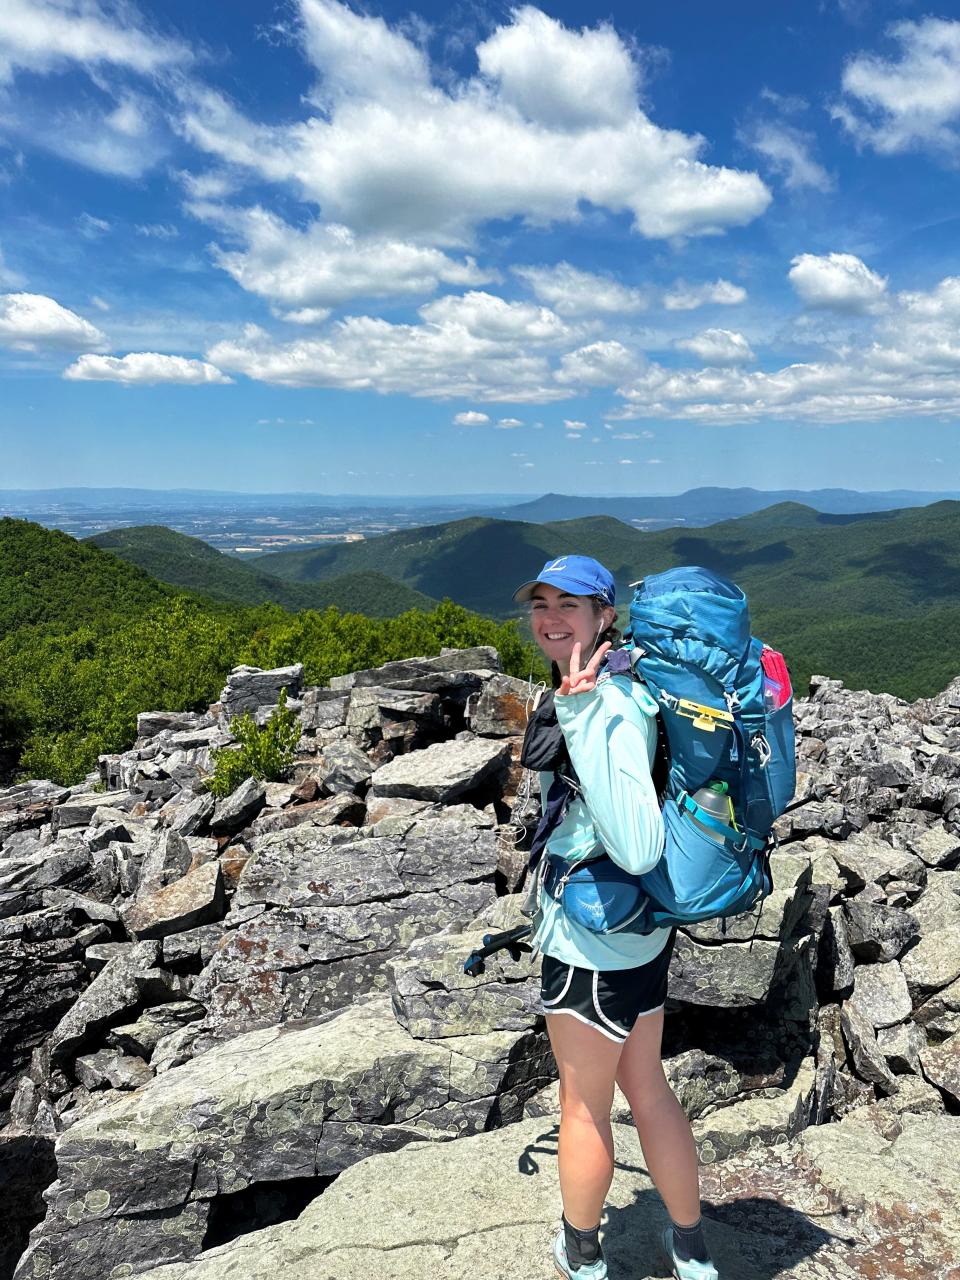 Poughkeepsie native Alexis Holzmann has hiked more than 1,500 miles of the Appalachian Trail since March 2023, and she seeks to become one of only about 20,000 people who has completed the 2,200-mile trek from Georgia to Maine.